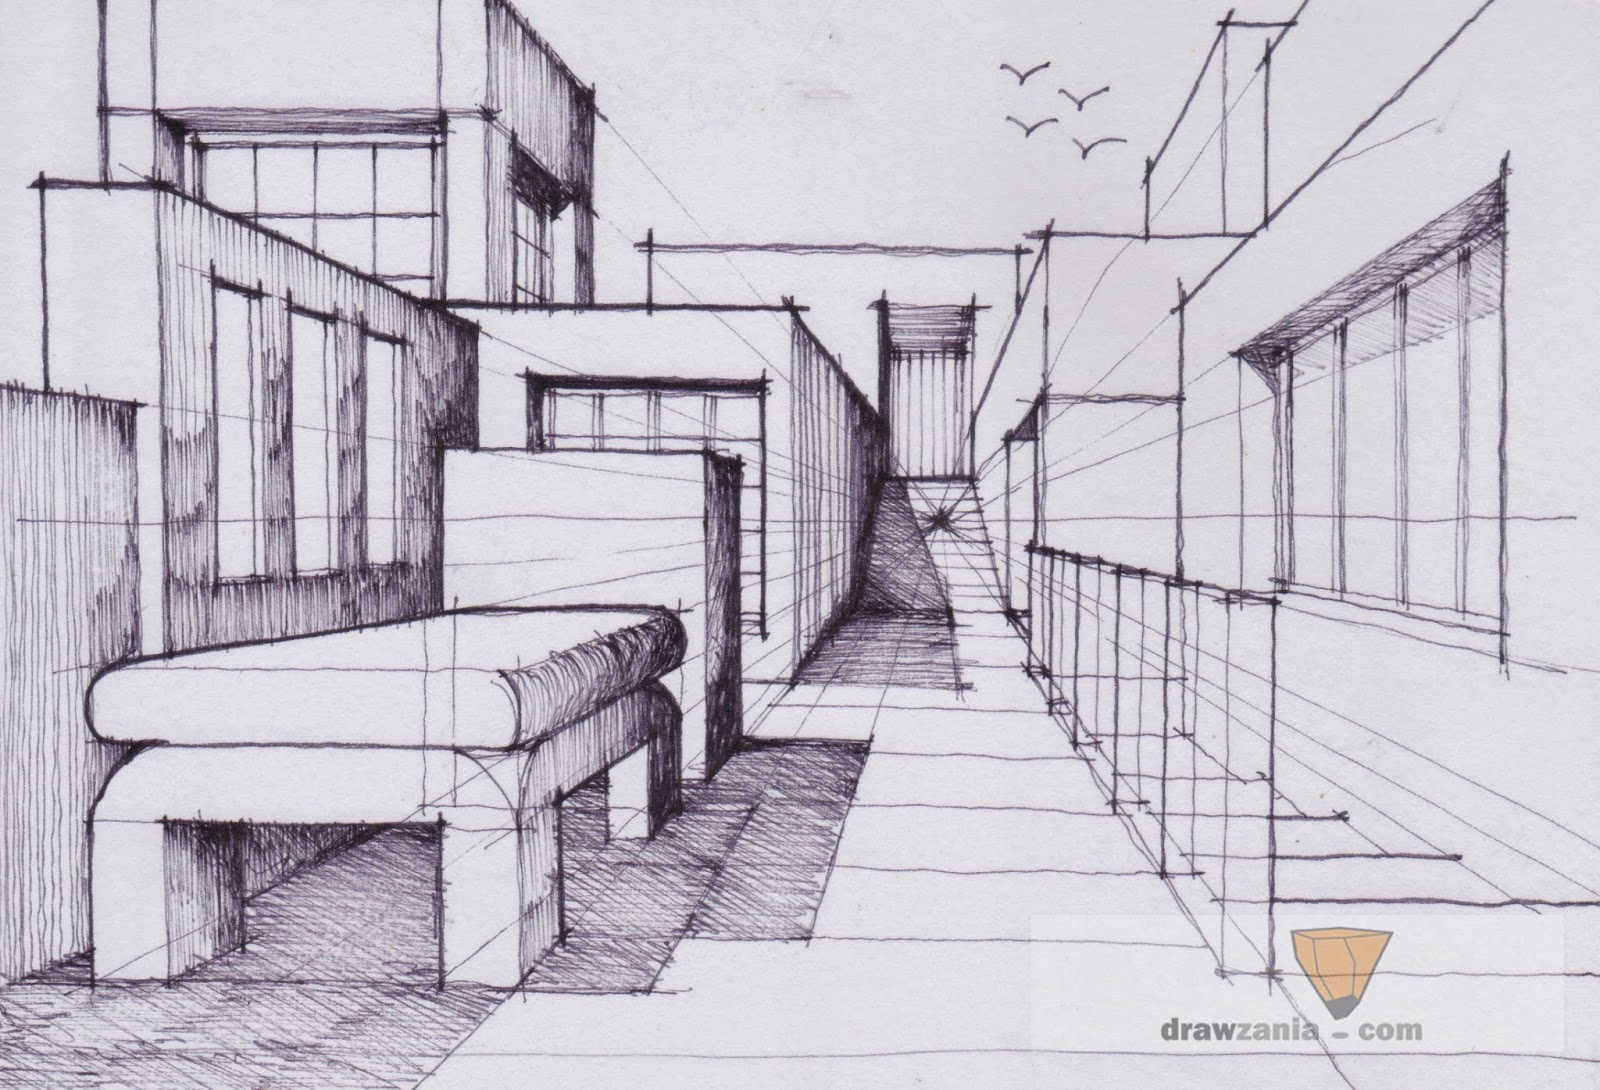 One-Point Perspective Drawing - How To Draw A One-Point